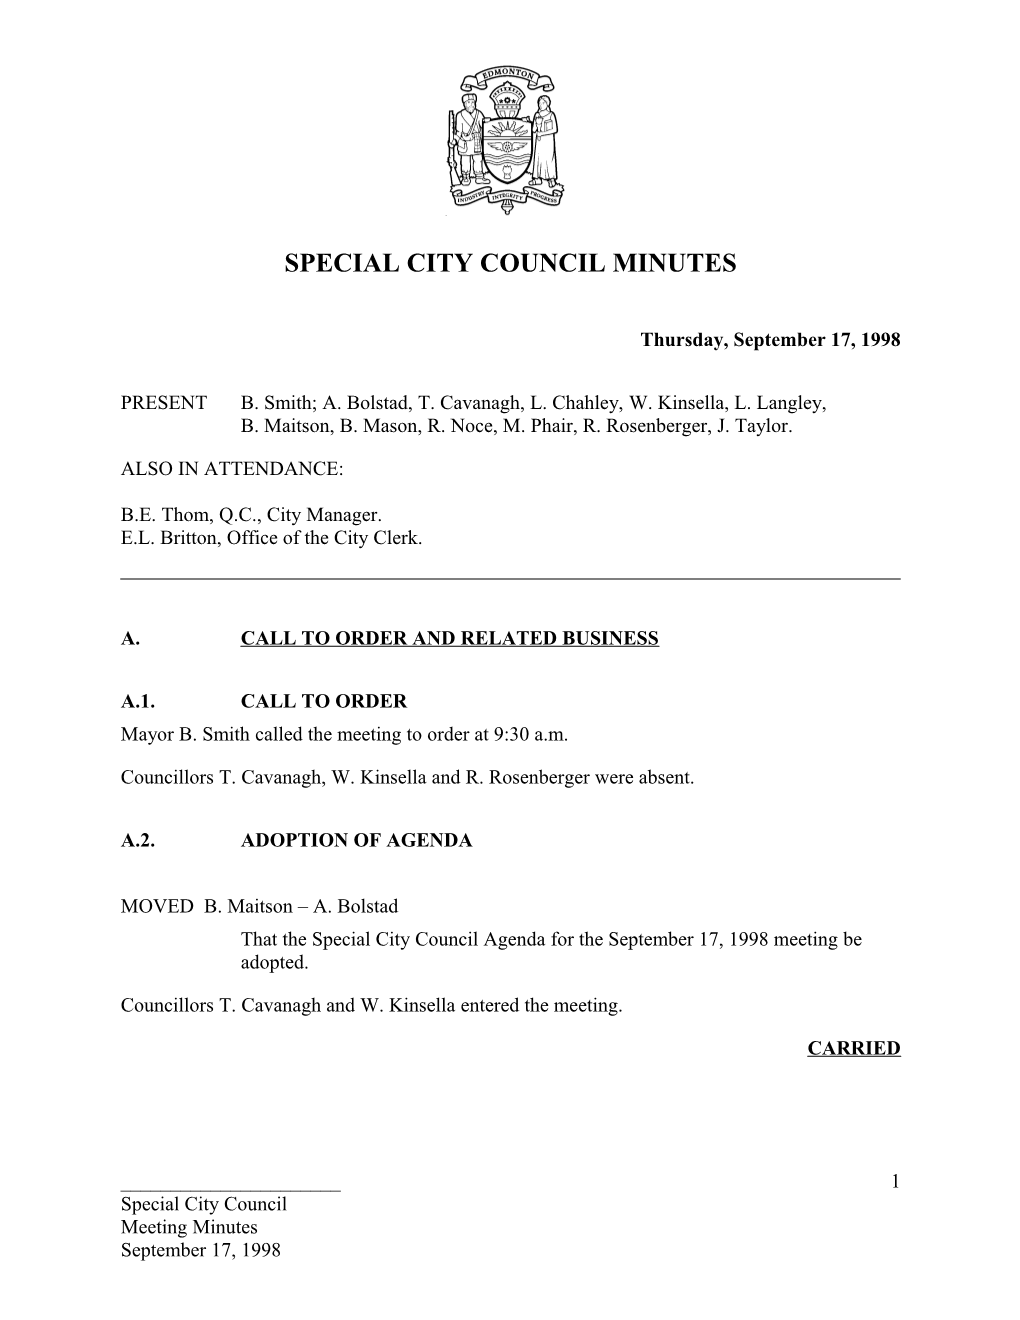 Minutes for City Council September 17, 1998 Meeting